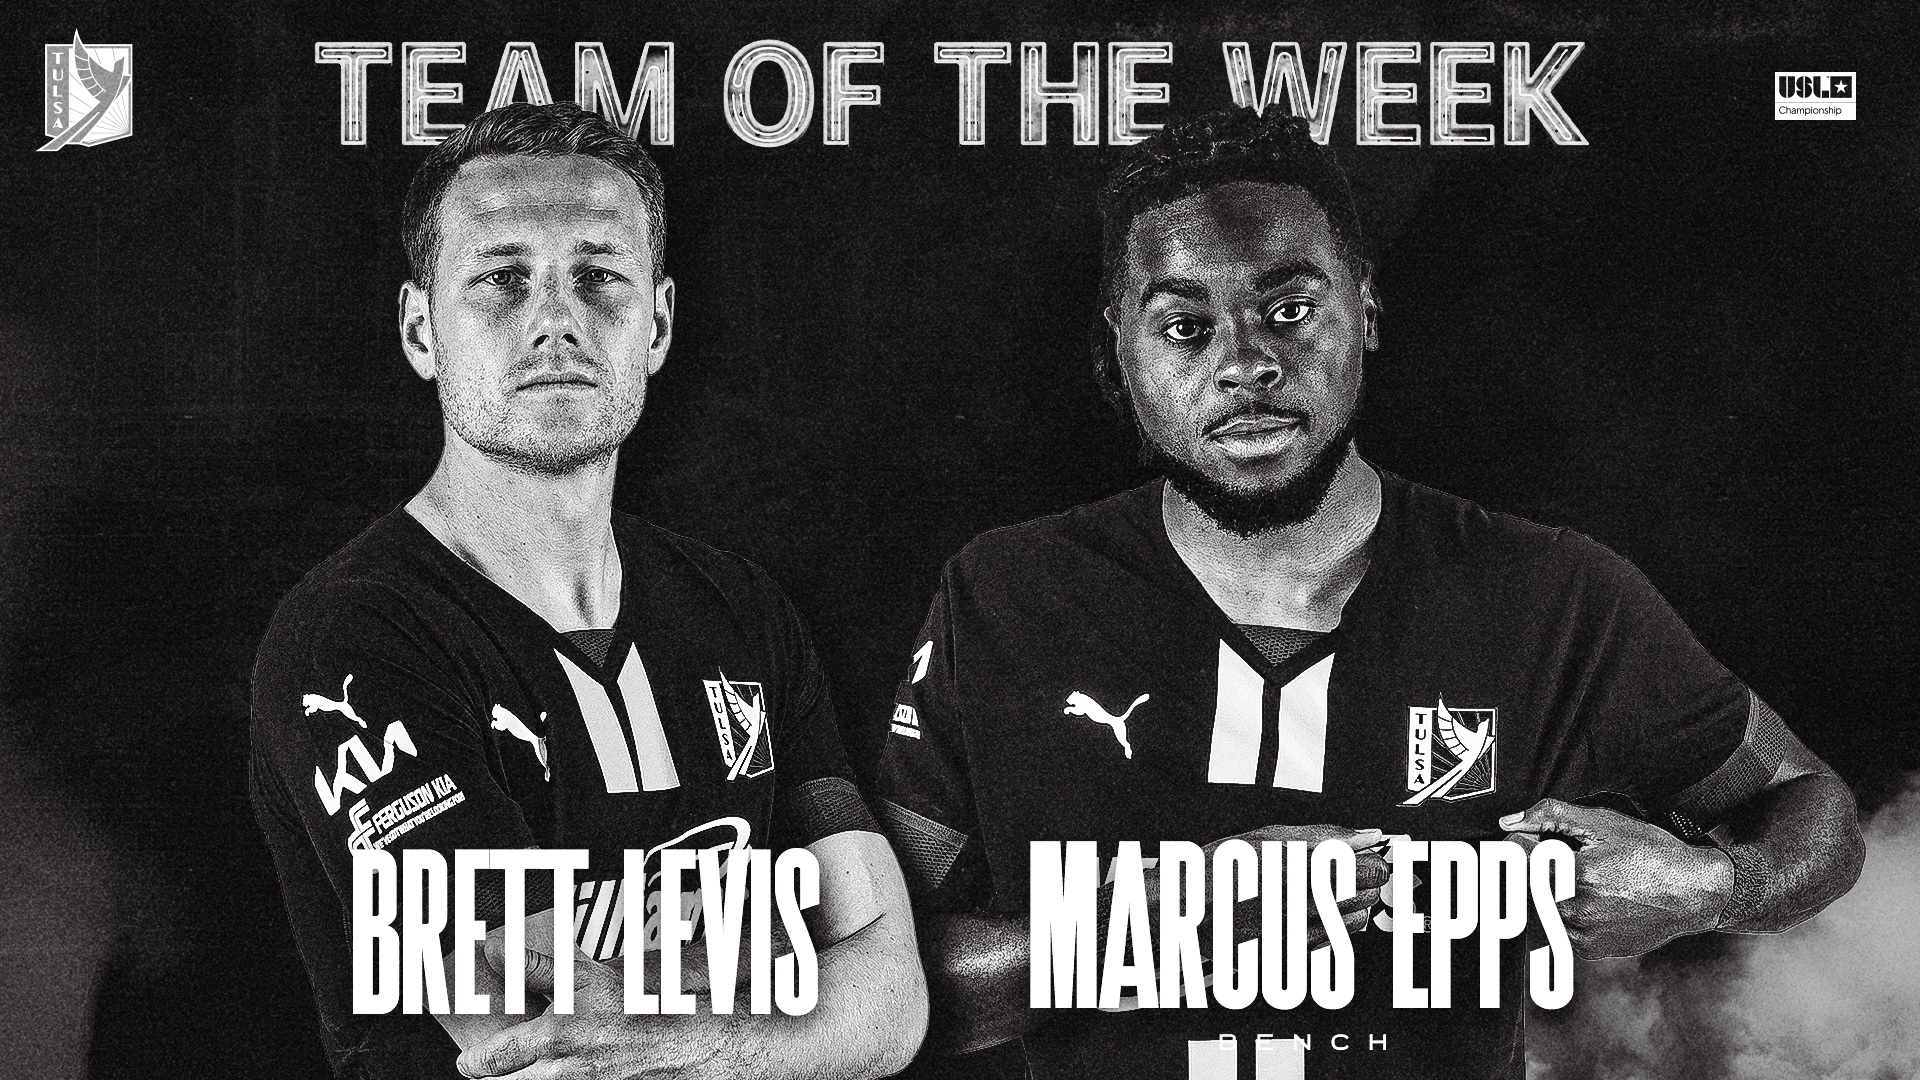 Brett Levis Named to Week 4 Team of the Week, Marcus Epps Named to TOTW  Bench - FC Tulsa